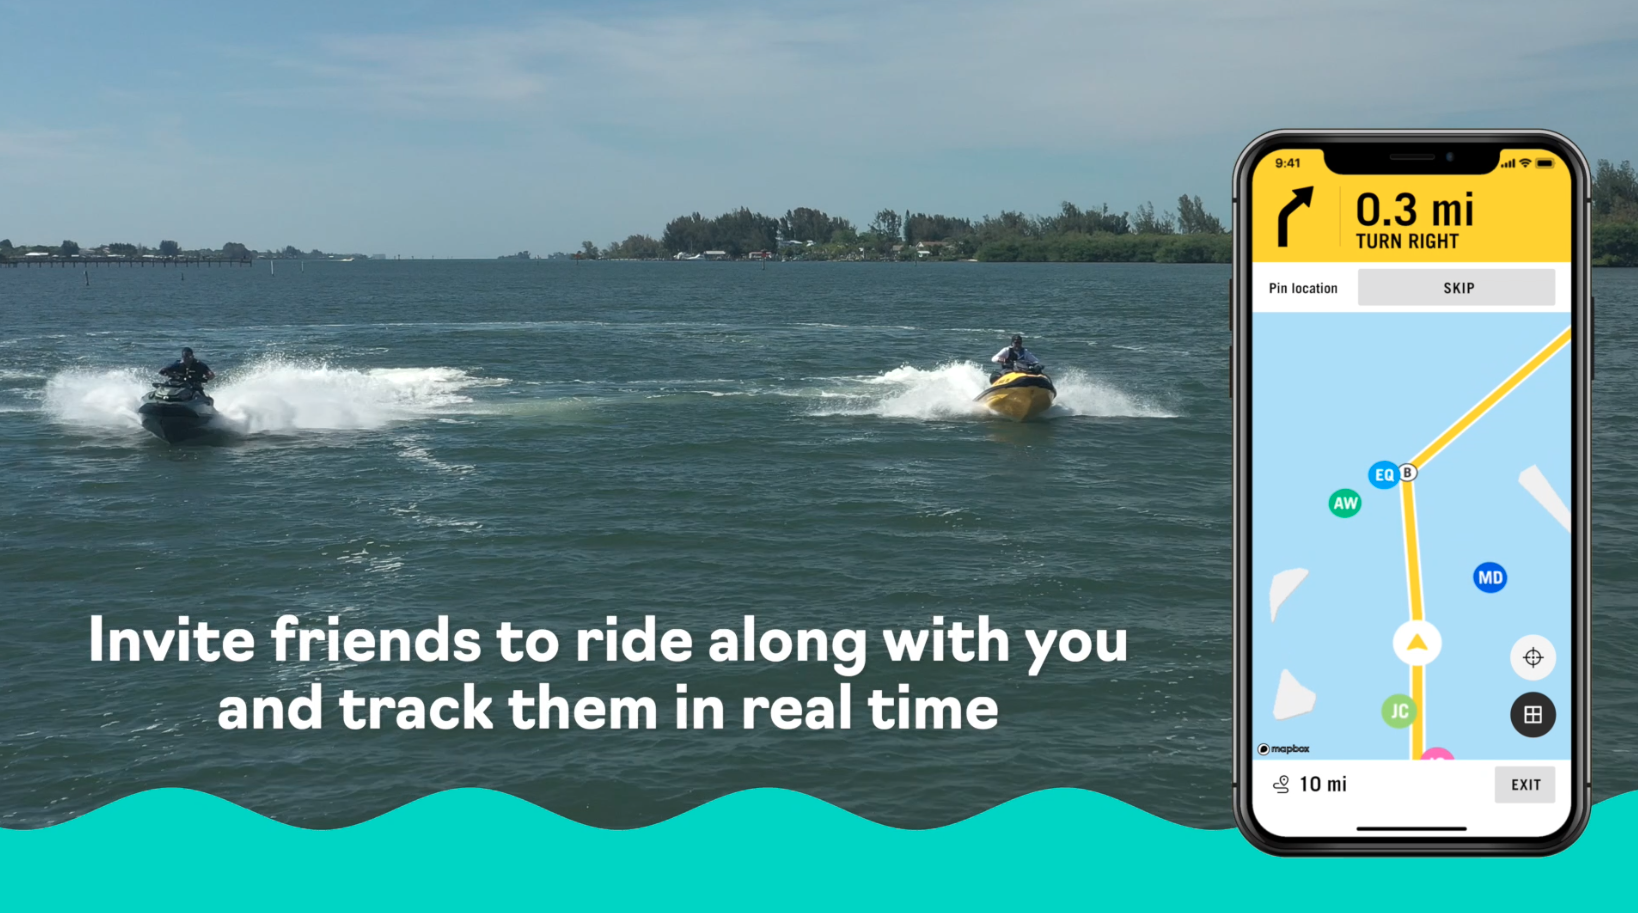 HOW TO CONNECT YOUR PHONE TO YOUR SEA-DOO!